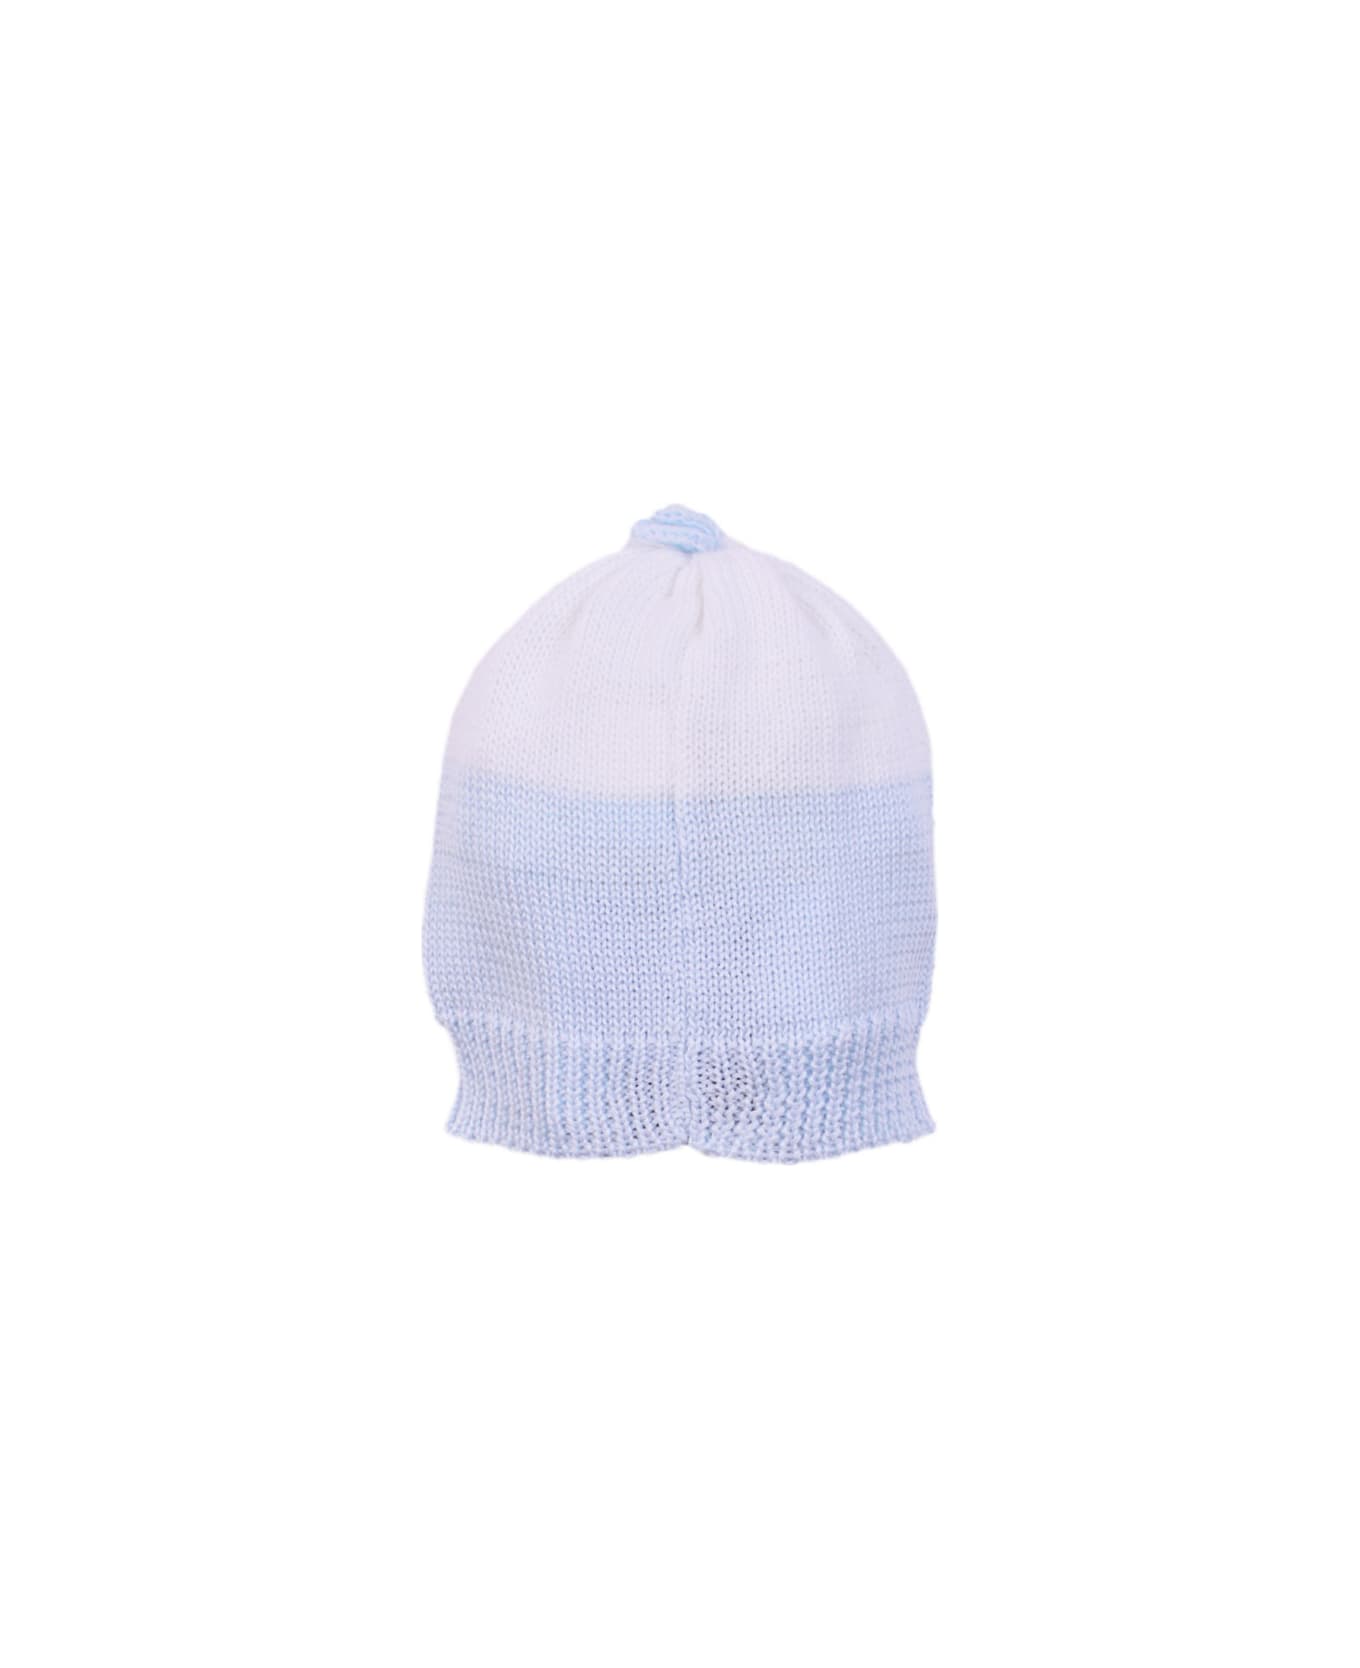 Piccola Giuggiola Cotton Knitted Hat - Light blue